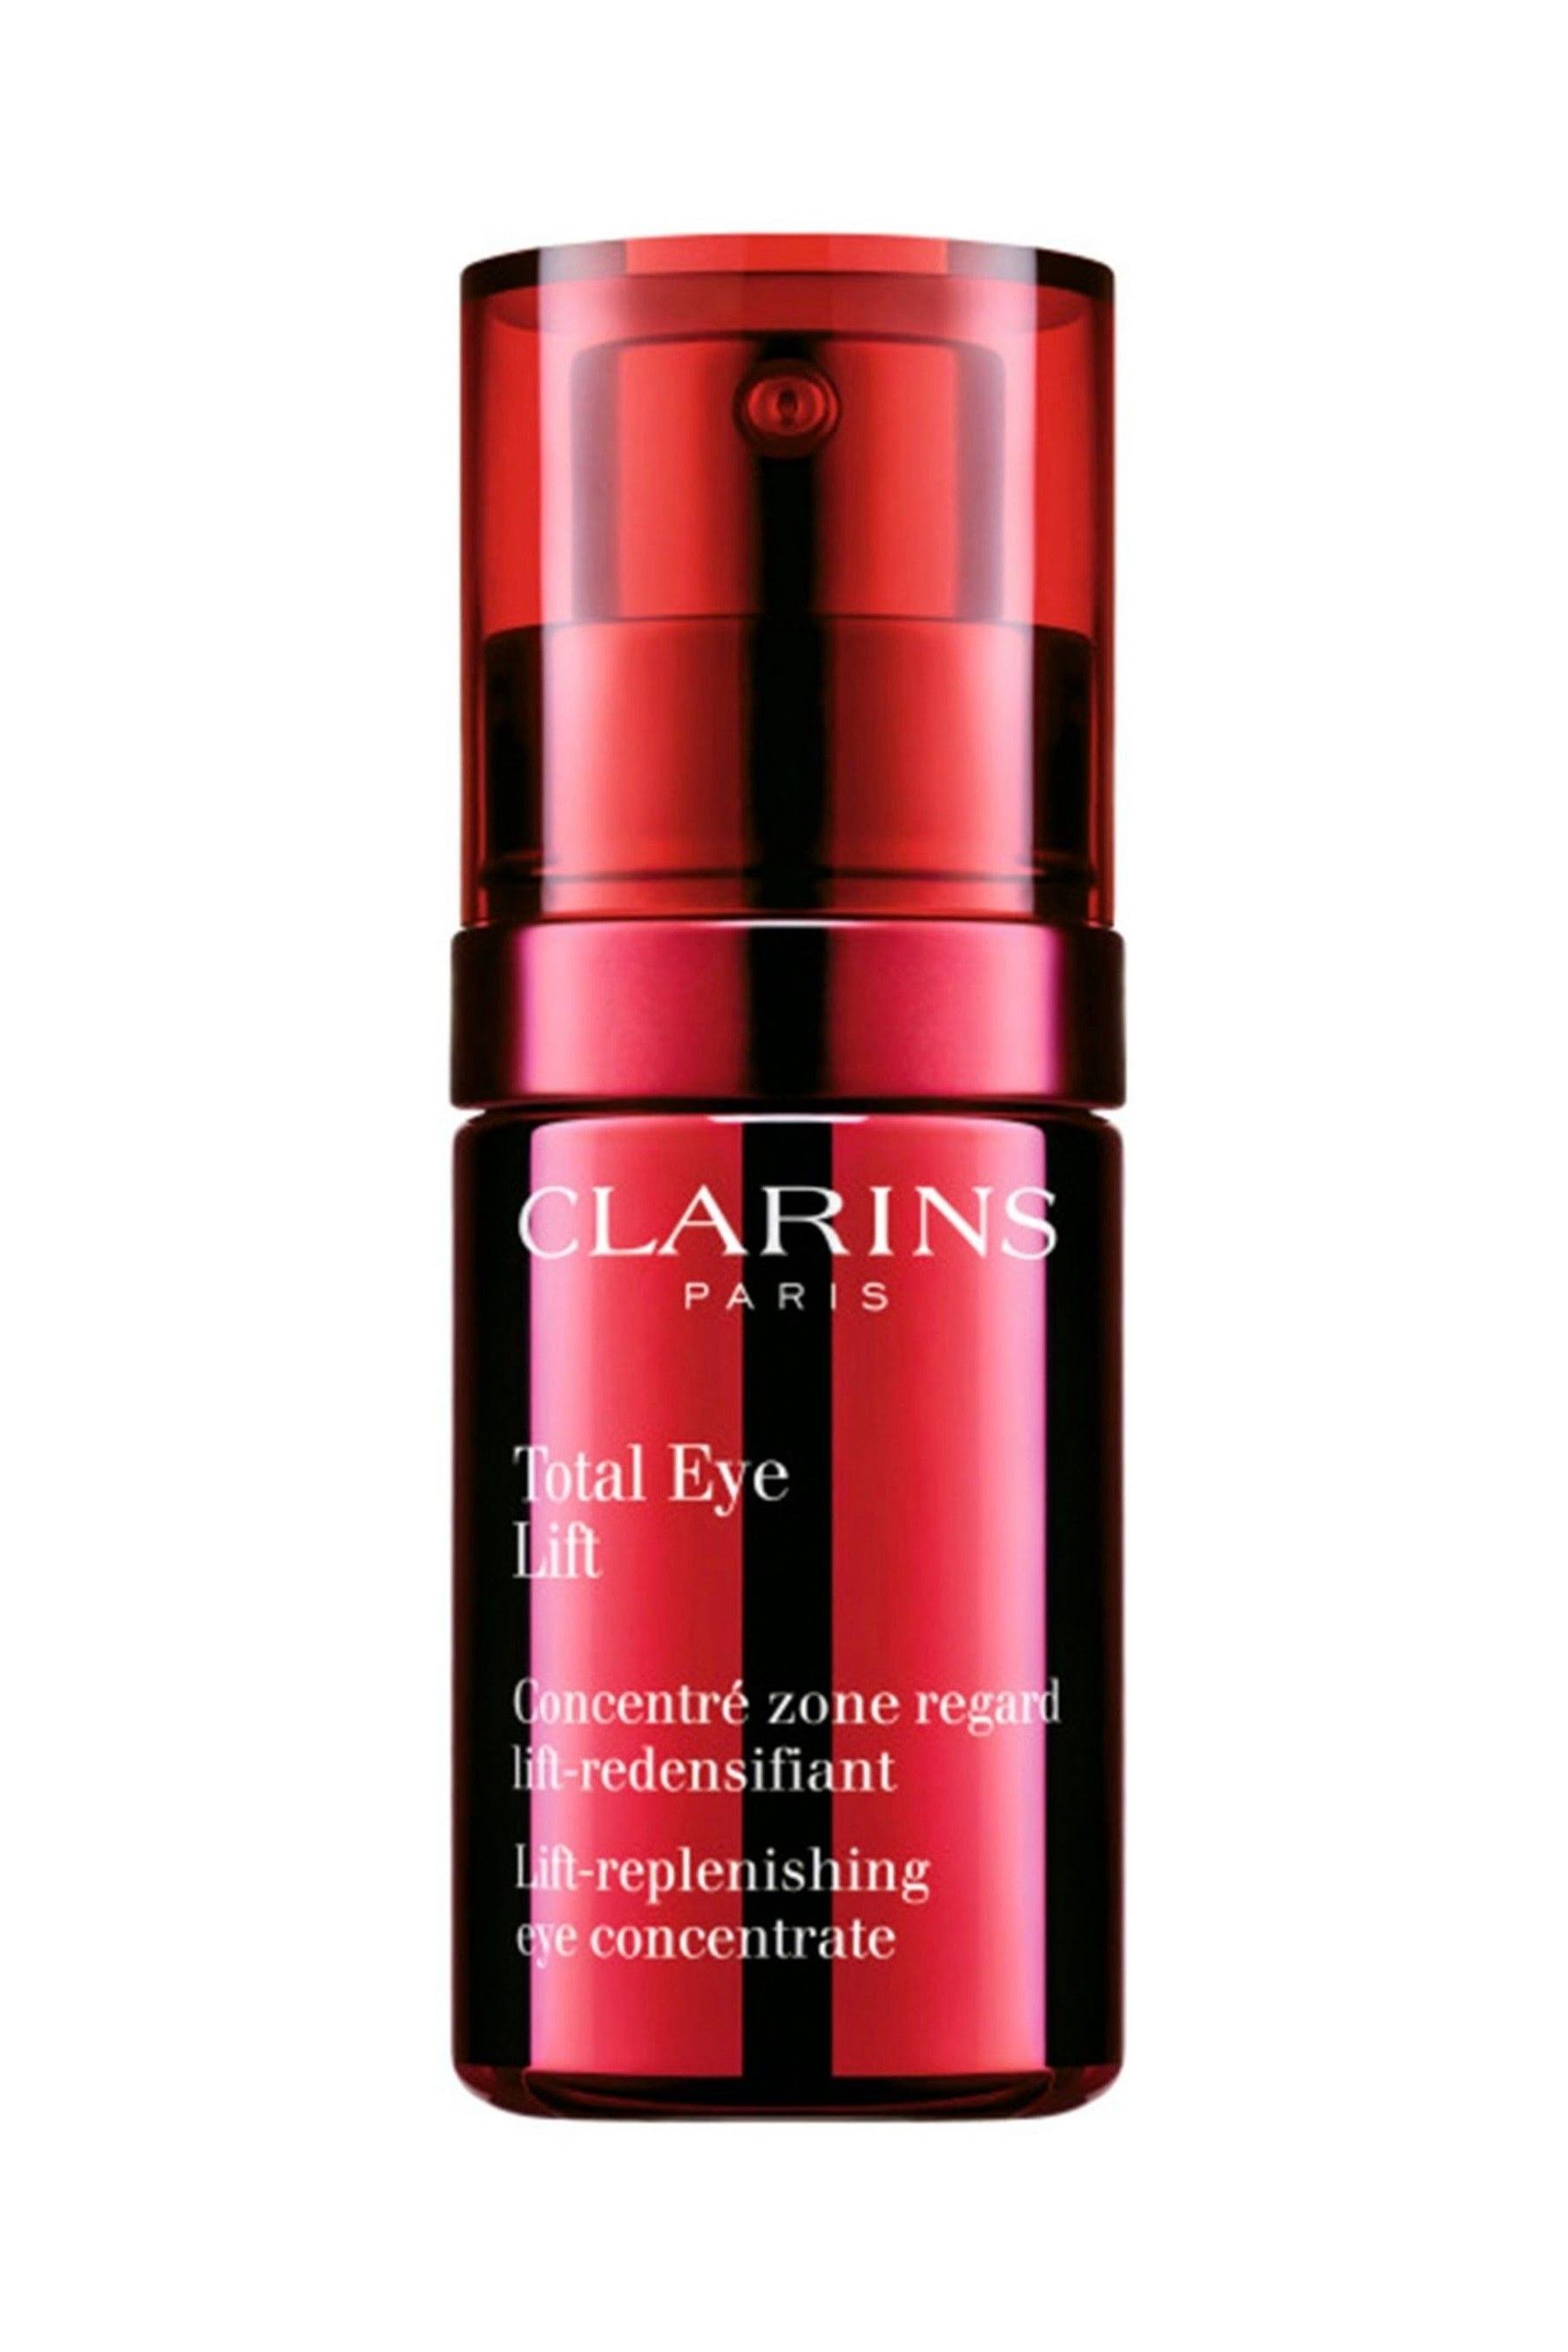 Clarins Total Eye Lift Concentrate 15ml